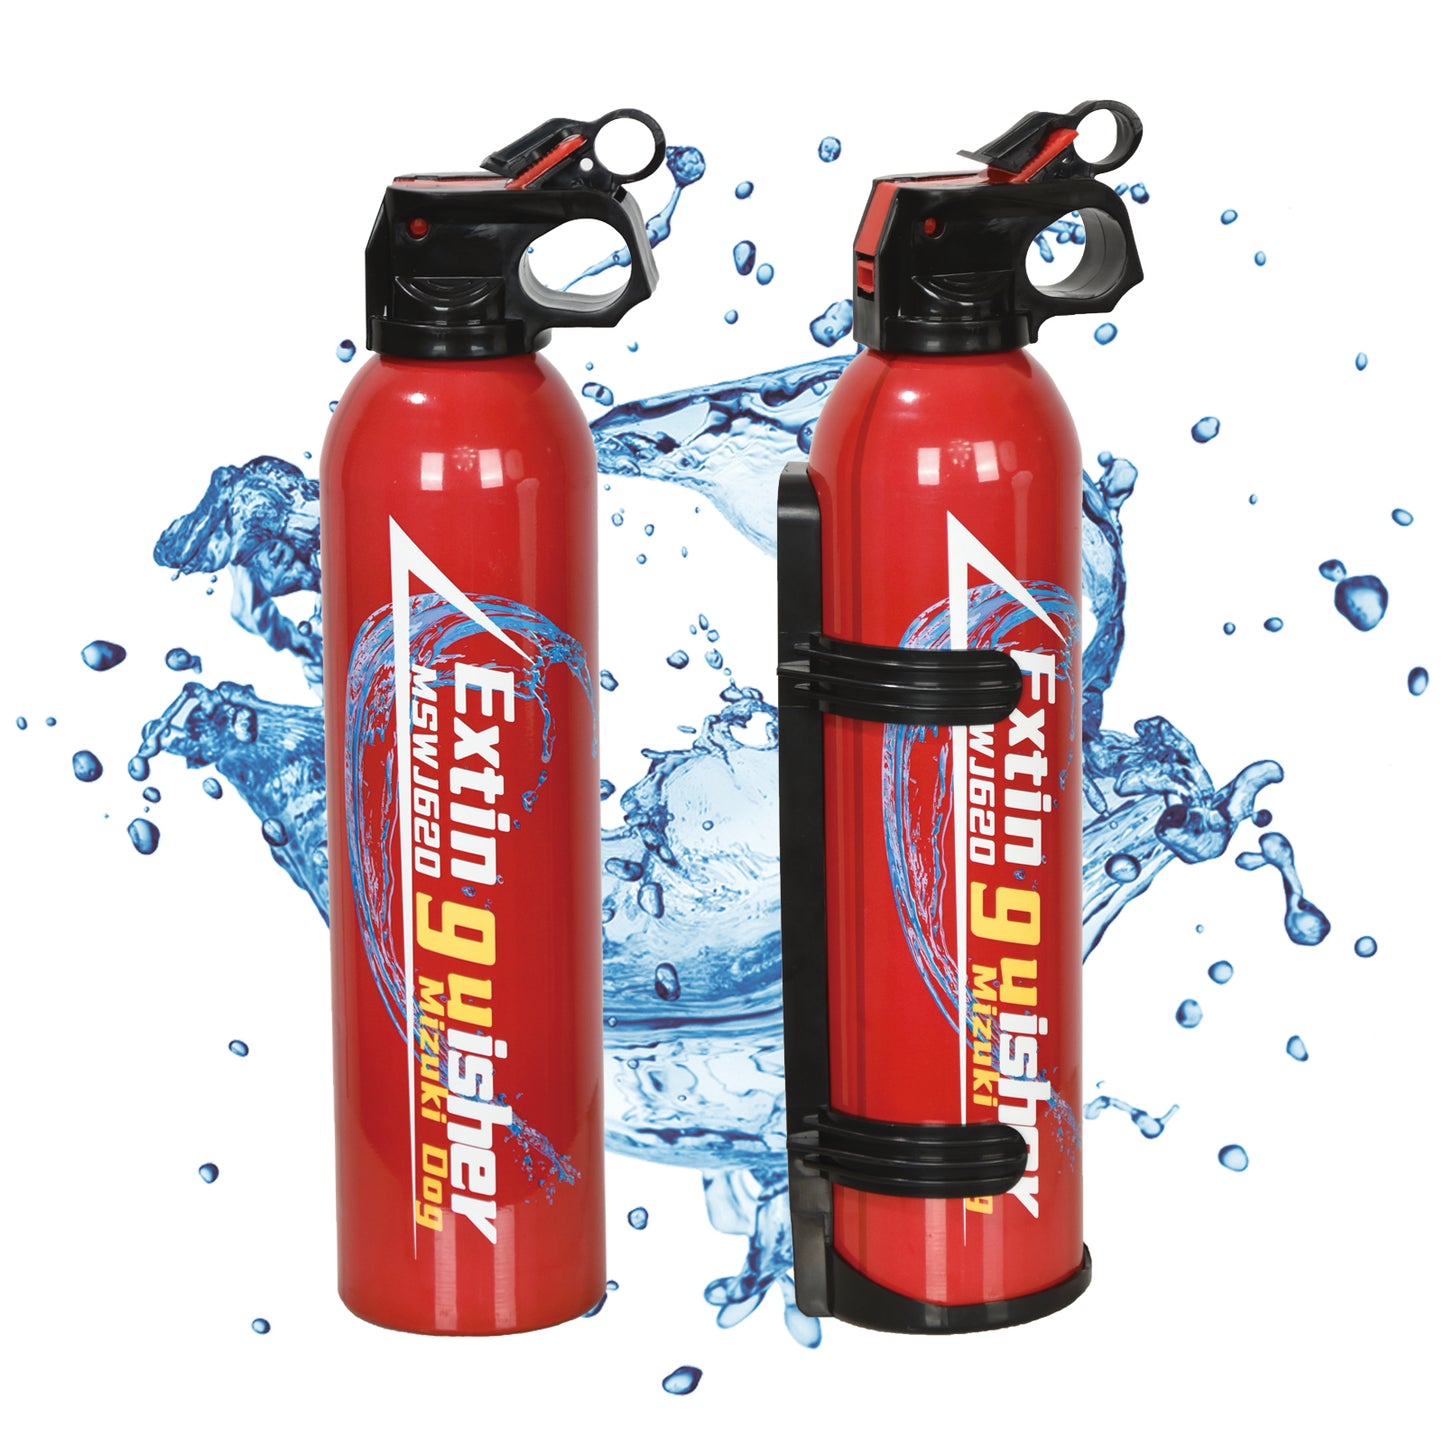 Water based fire extinguisher